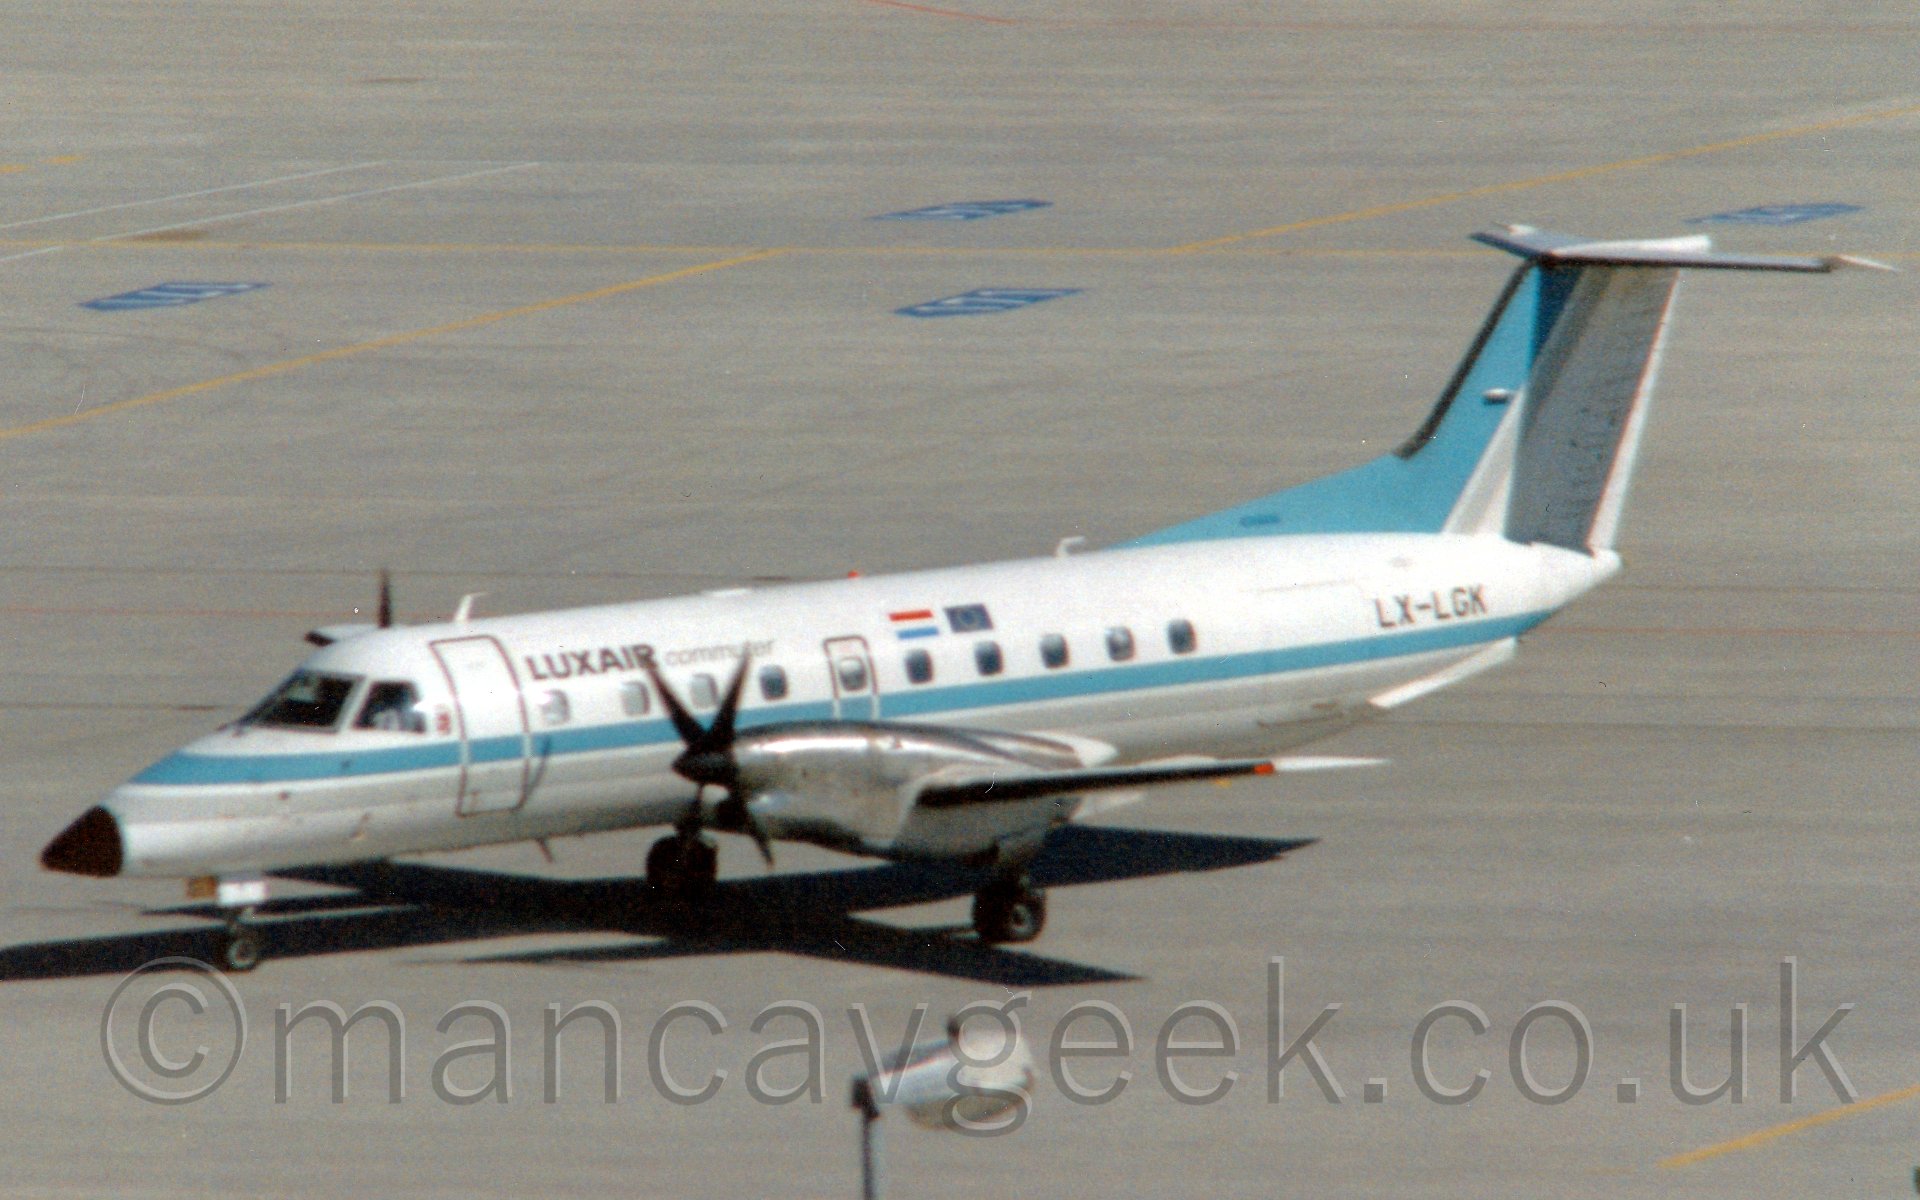 Side view of a twin propellor-engined airlinertaxiing from right to left. The plane is mostly white, with a thick light blue and light grey stripe running along the body from the nose. There are small "Luxair" titles on the upper forward fuselage, just aft of the forward door. The tail is mostly white, with a light blue leading edge, and light grey diagonal stripe. The engine pods are a bare metal finish. In the background, acres of concrete fill the screen.